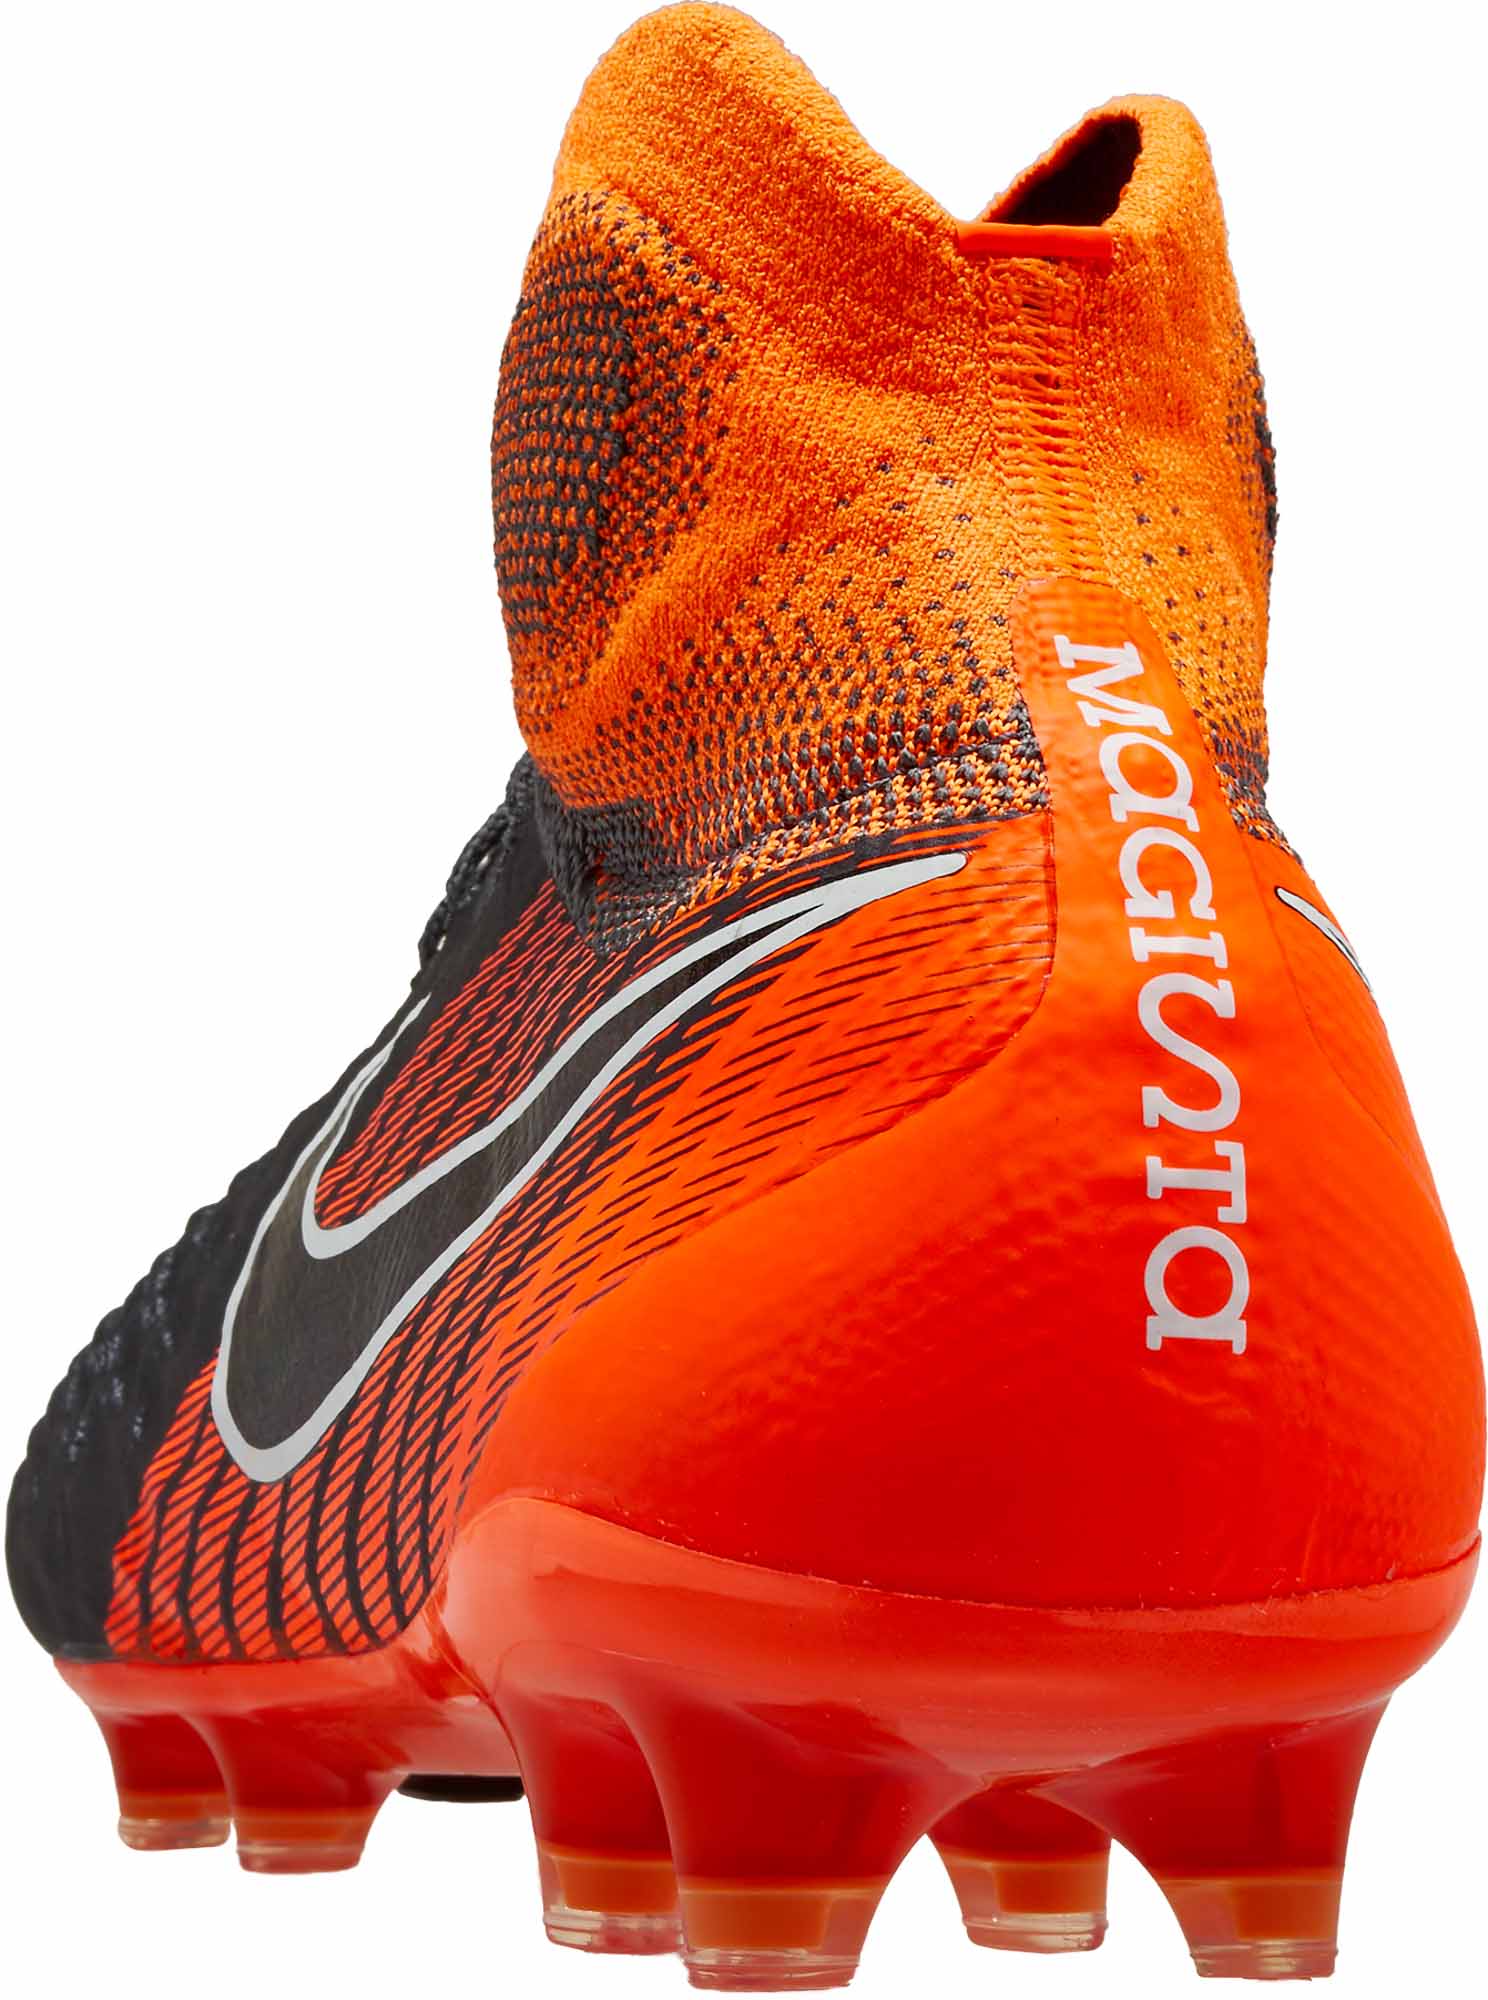 nike magista youth soccer cleats